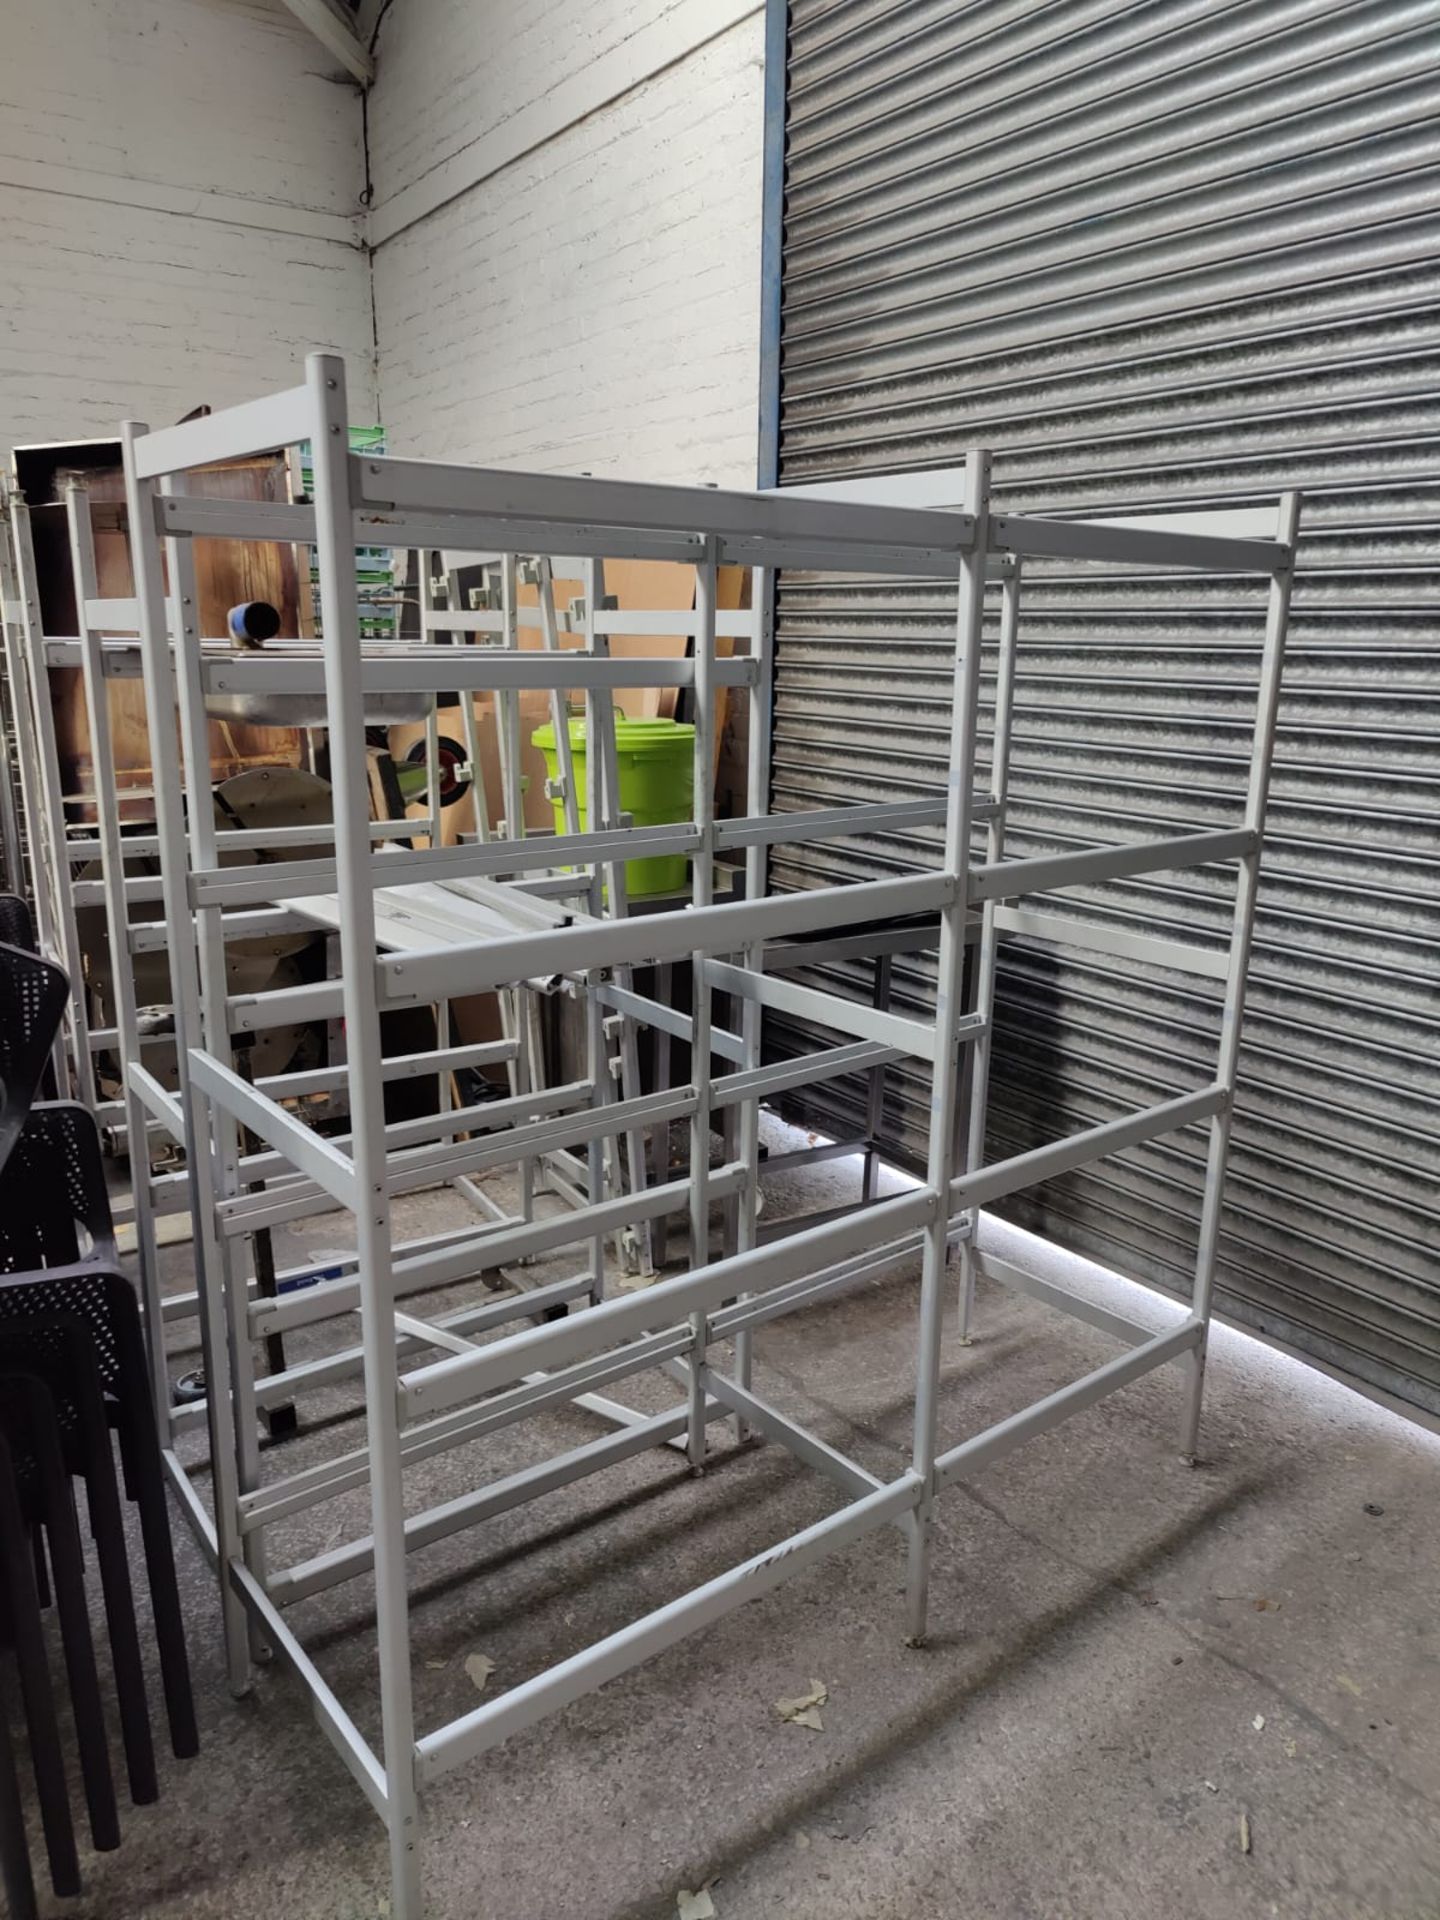 1 x Collection of Cold Room Shelving - Aluminium Shelving With Hygienic Plastic Perforated Shelves - - Image 5 of 5